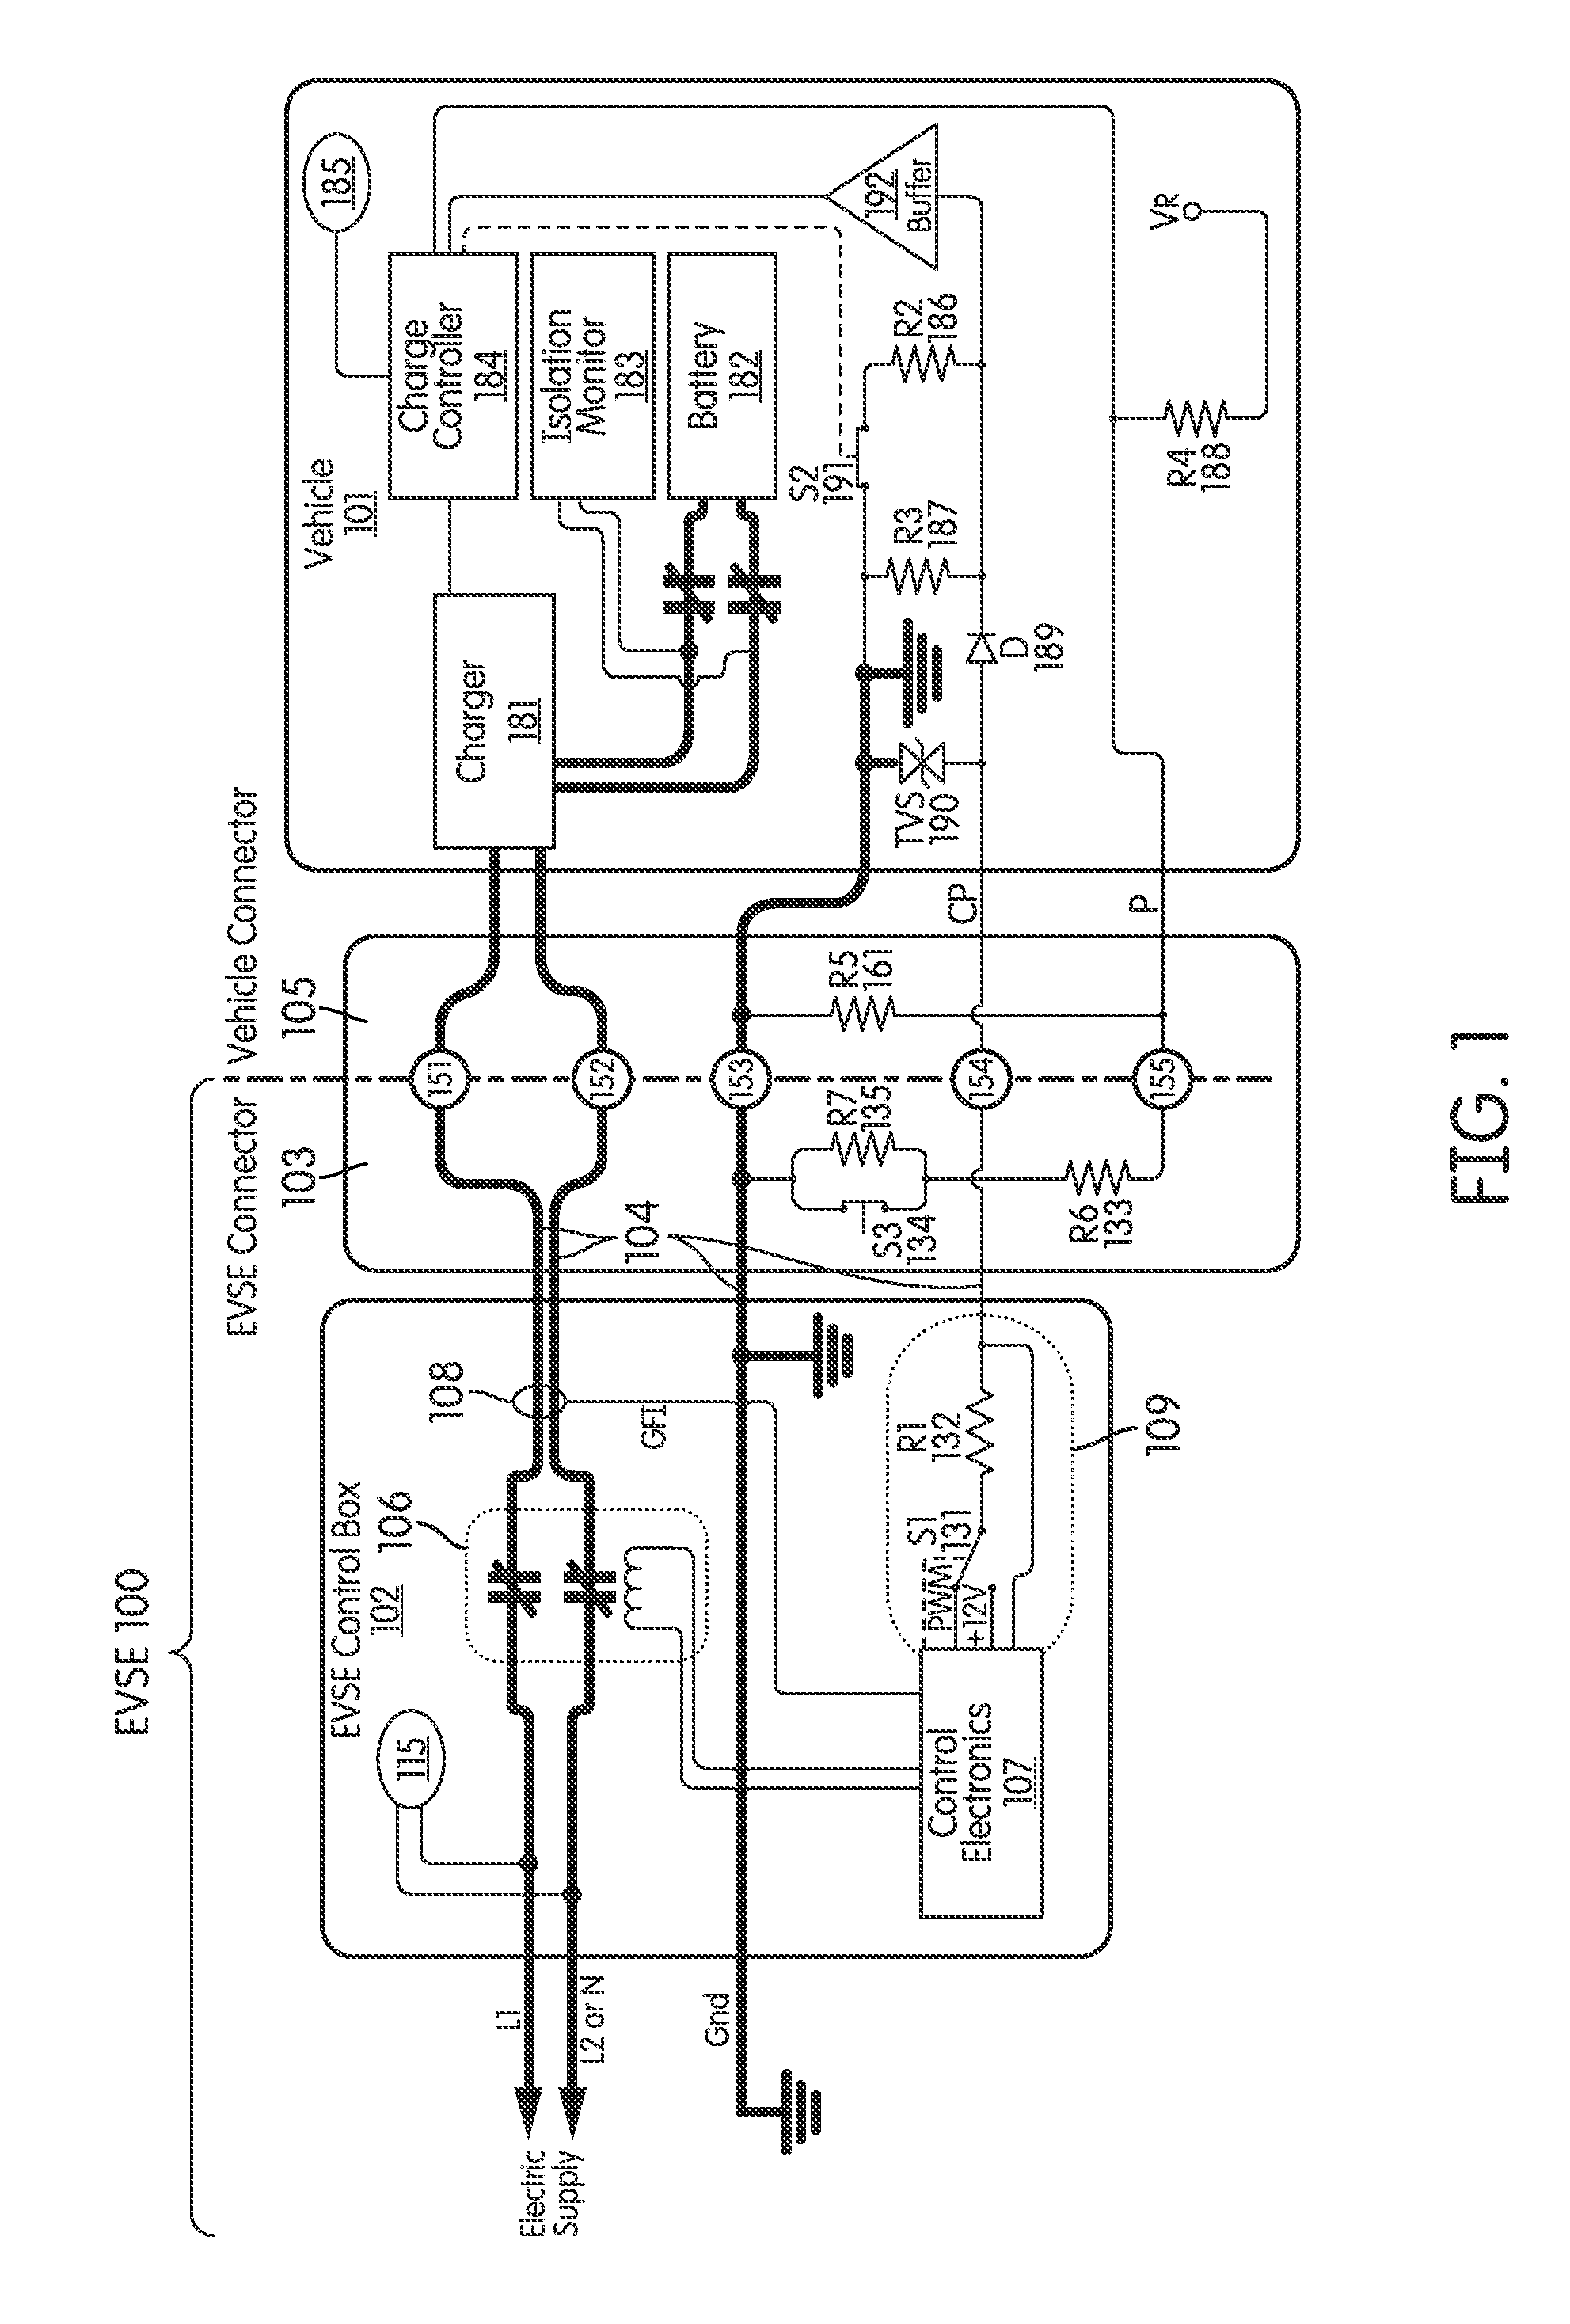 Diagnostic Receptacle For Electric Vehicle Supply Equipment